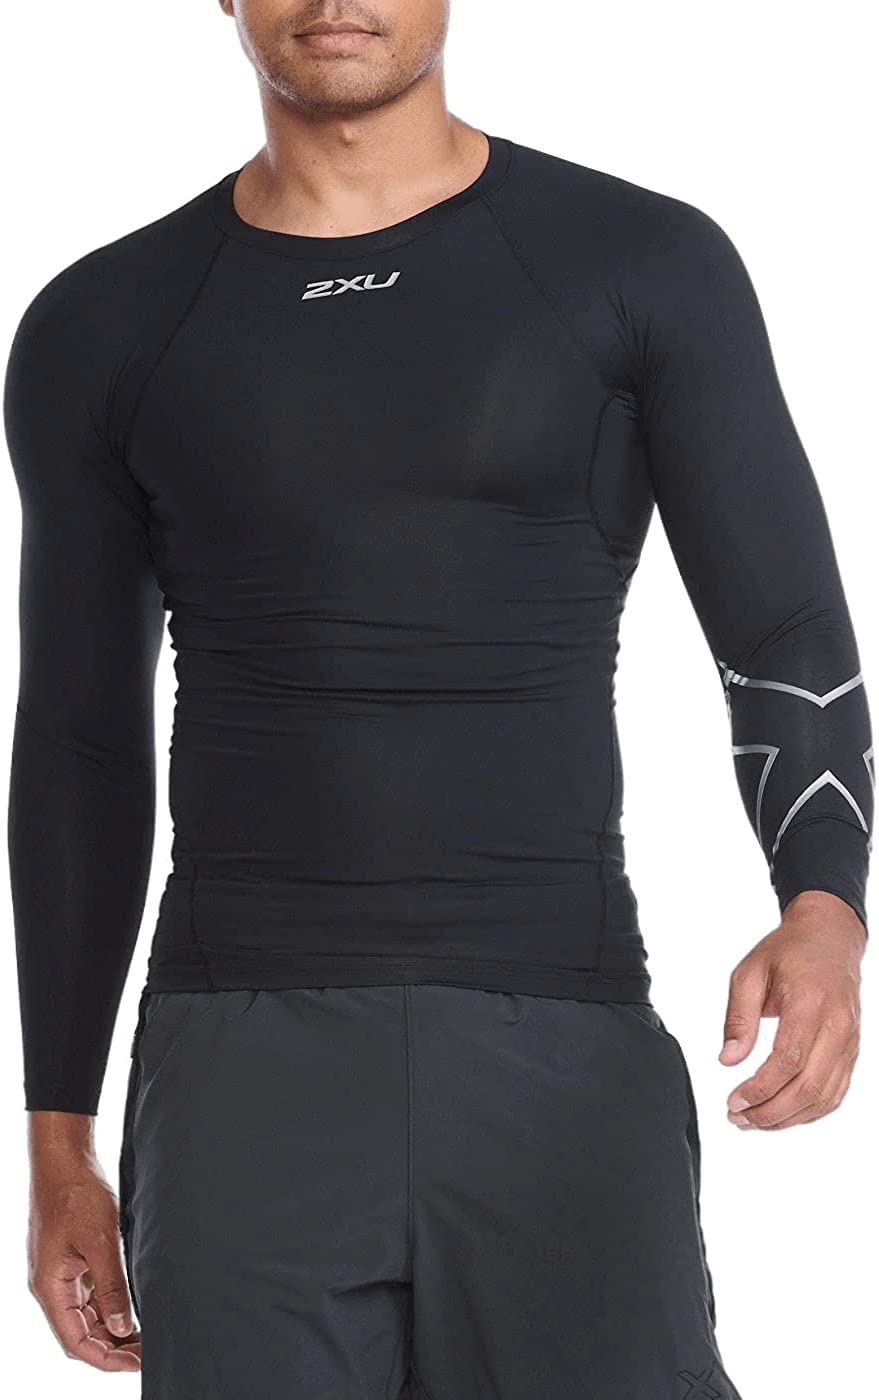 2XU Core Compression Long Sleeve best workout clothes for gym